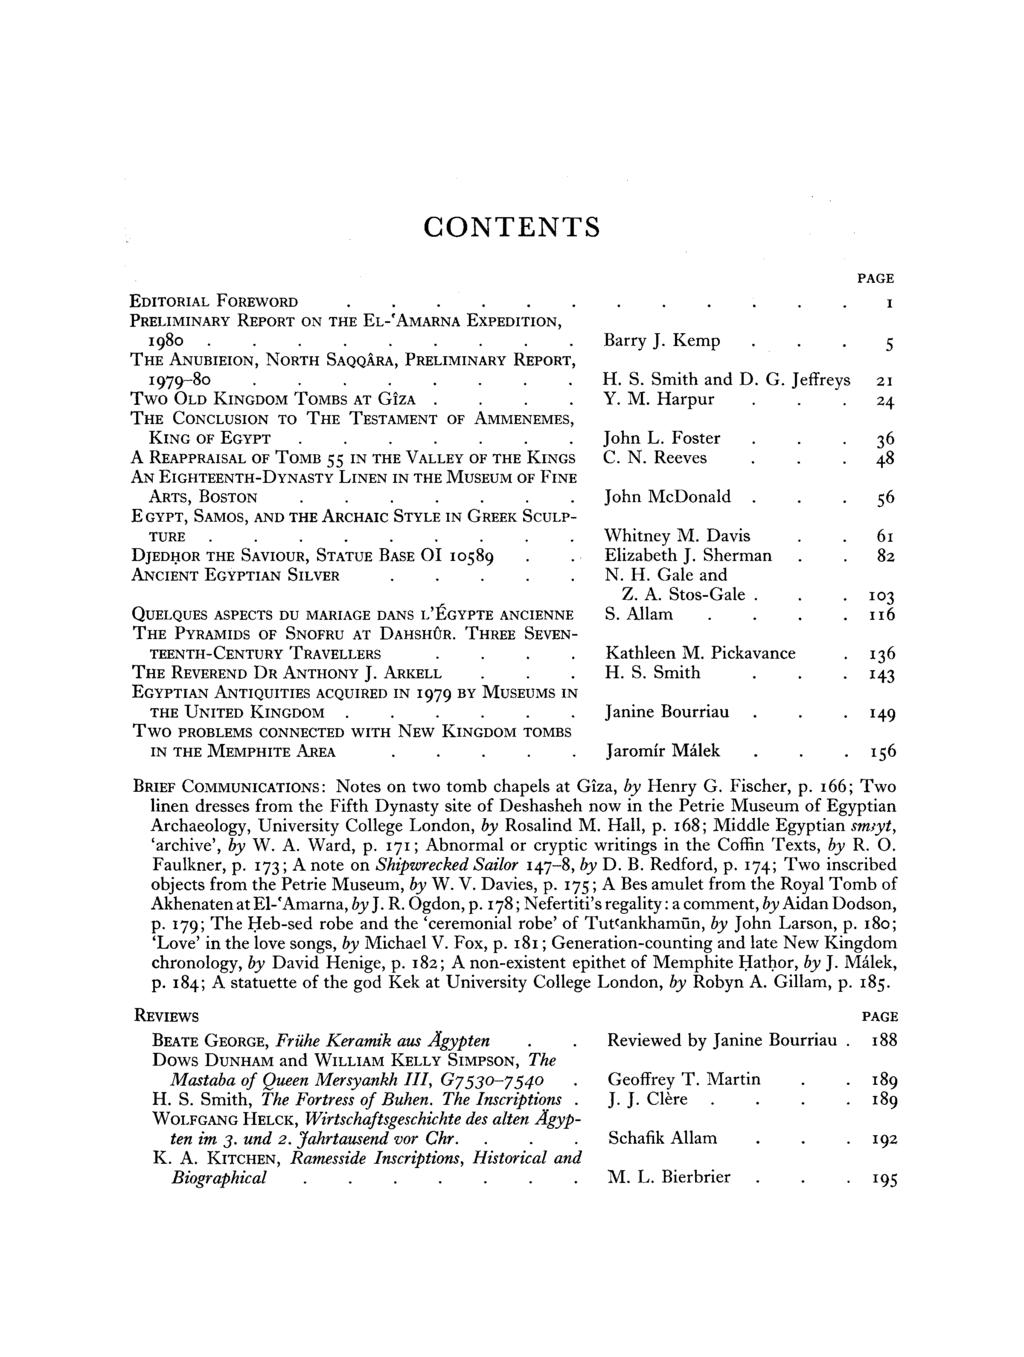 CONTENTS EDITORIAL FOREWORD 1 PRELIMINARY REPORT ON THE EL-'AMARNA EXPEDITION, 1980......... Barry J. Kemp 5 THE ANUBIEION, NORTH SAQQARA, PRELIMINARY REPORT, 1979-80........ H. S. Smith and D. G.